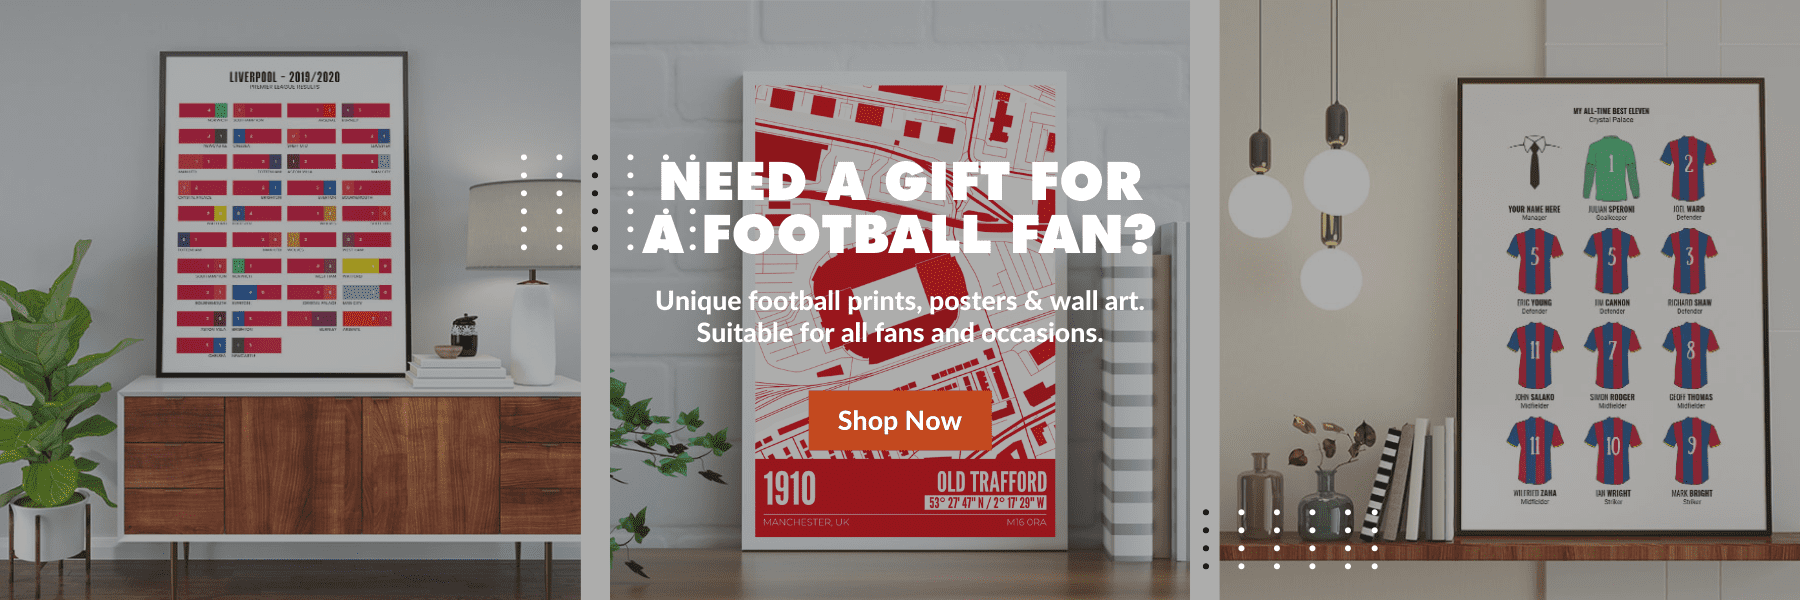 slide-1-need-gift-for-football-fan-personalised-football-prints-posters-wal